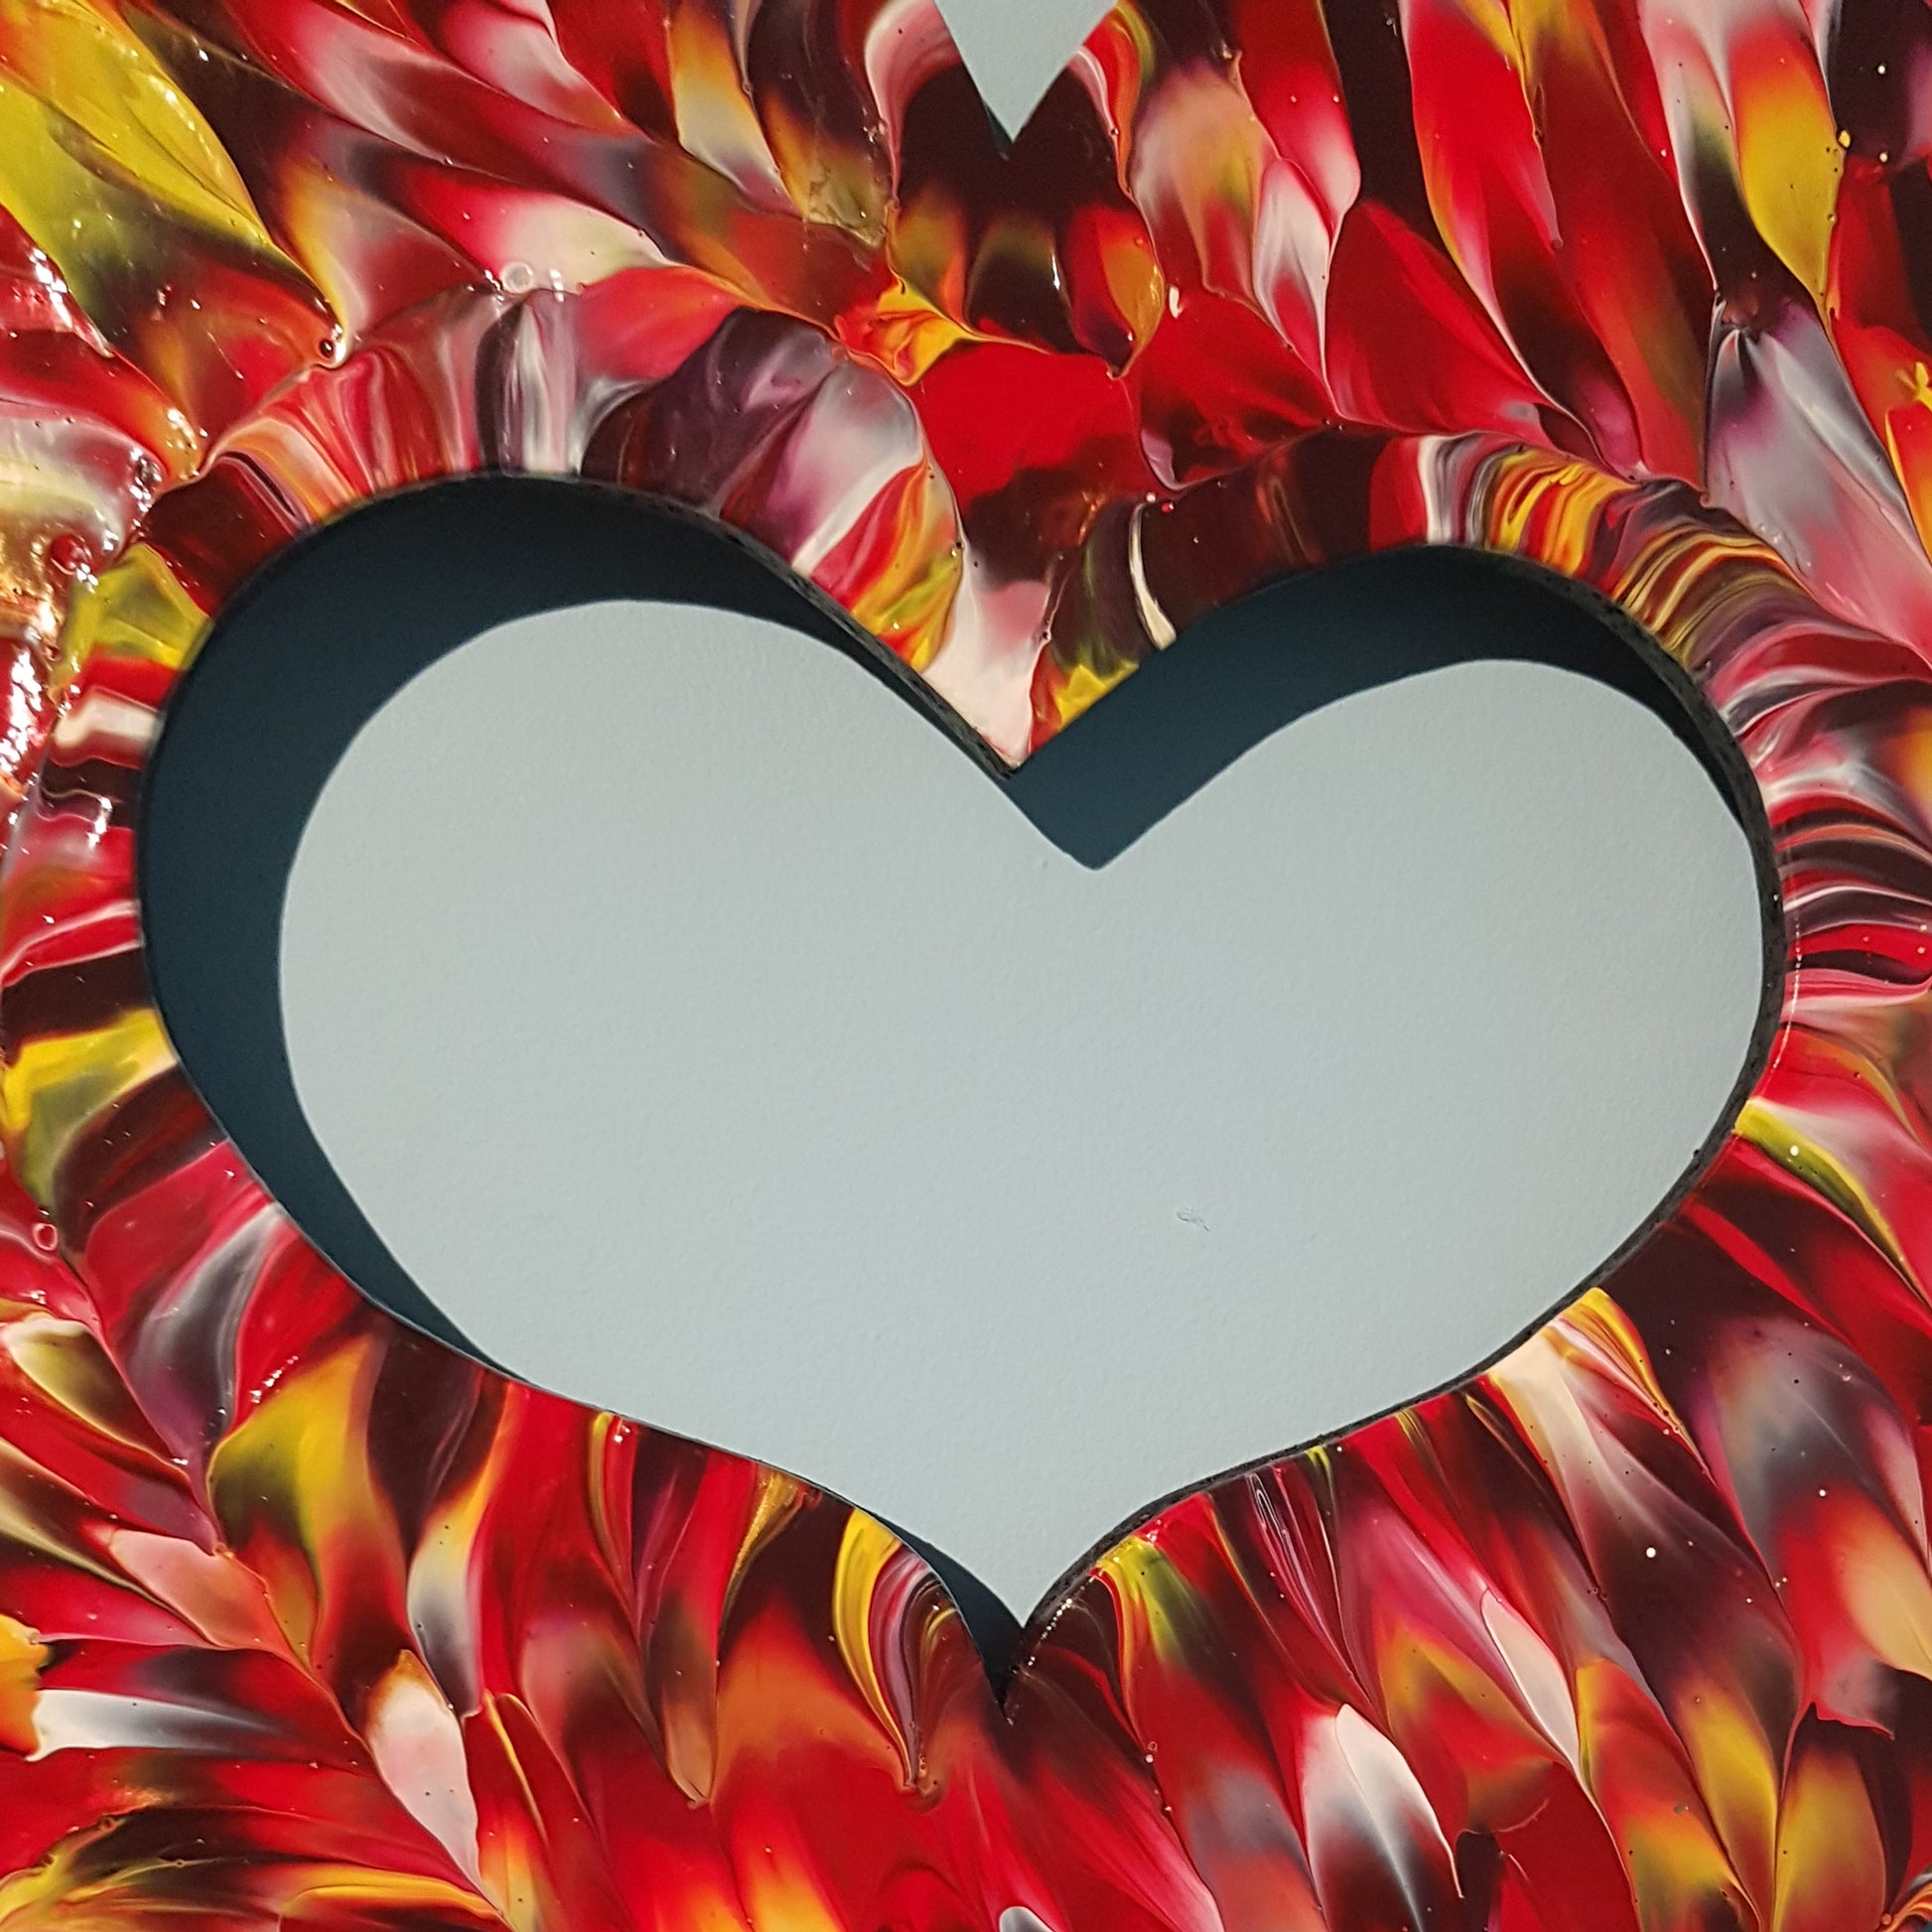 I-Love-You-With-All-My-Art-by-Alexandra-Romano-Unique-Abstracts-Red-Heart-Shaped-Custom-Made-Paintings-Toronto-Artwork